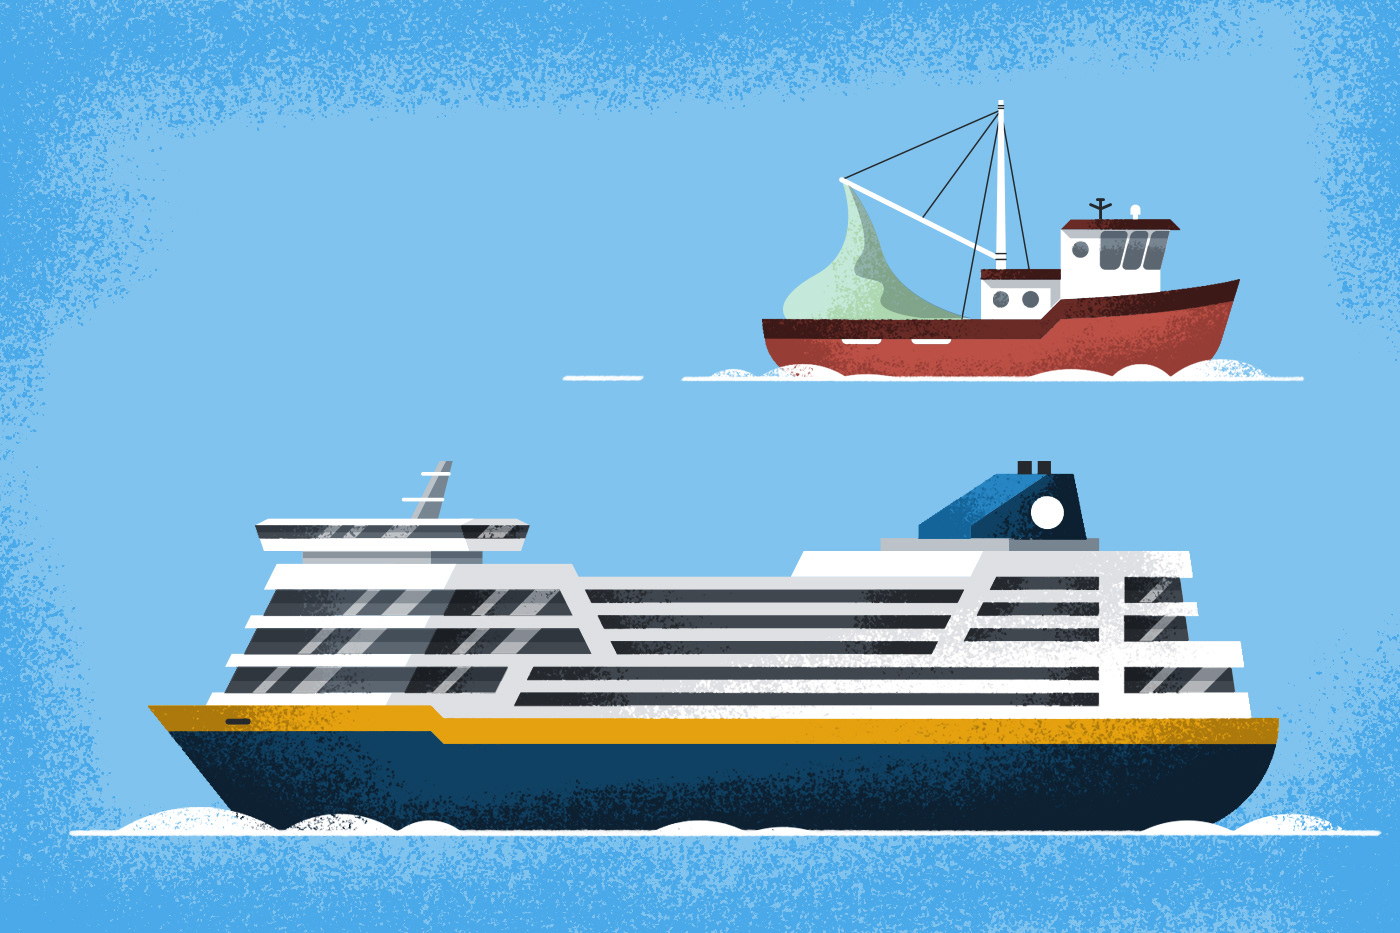 Illustrated icons of the big Scandinavian ferry line and a fisher boat by Adrian Bauer